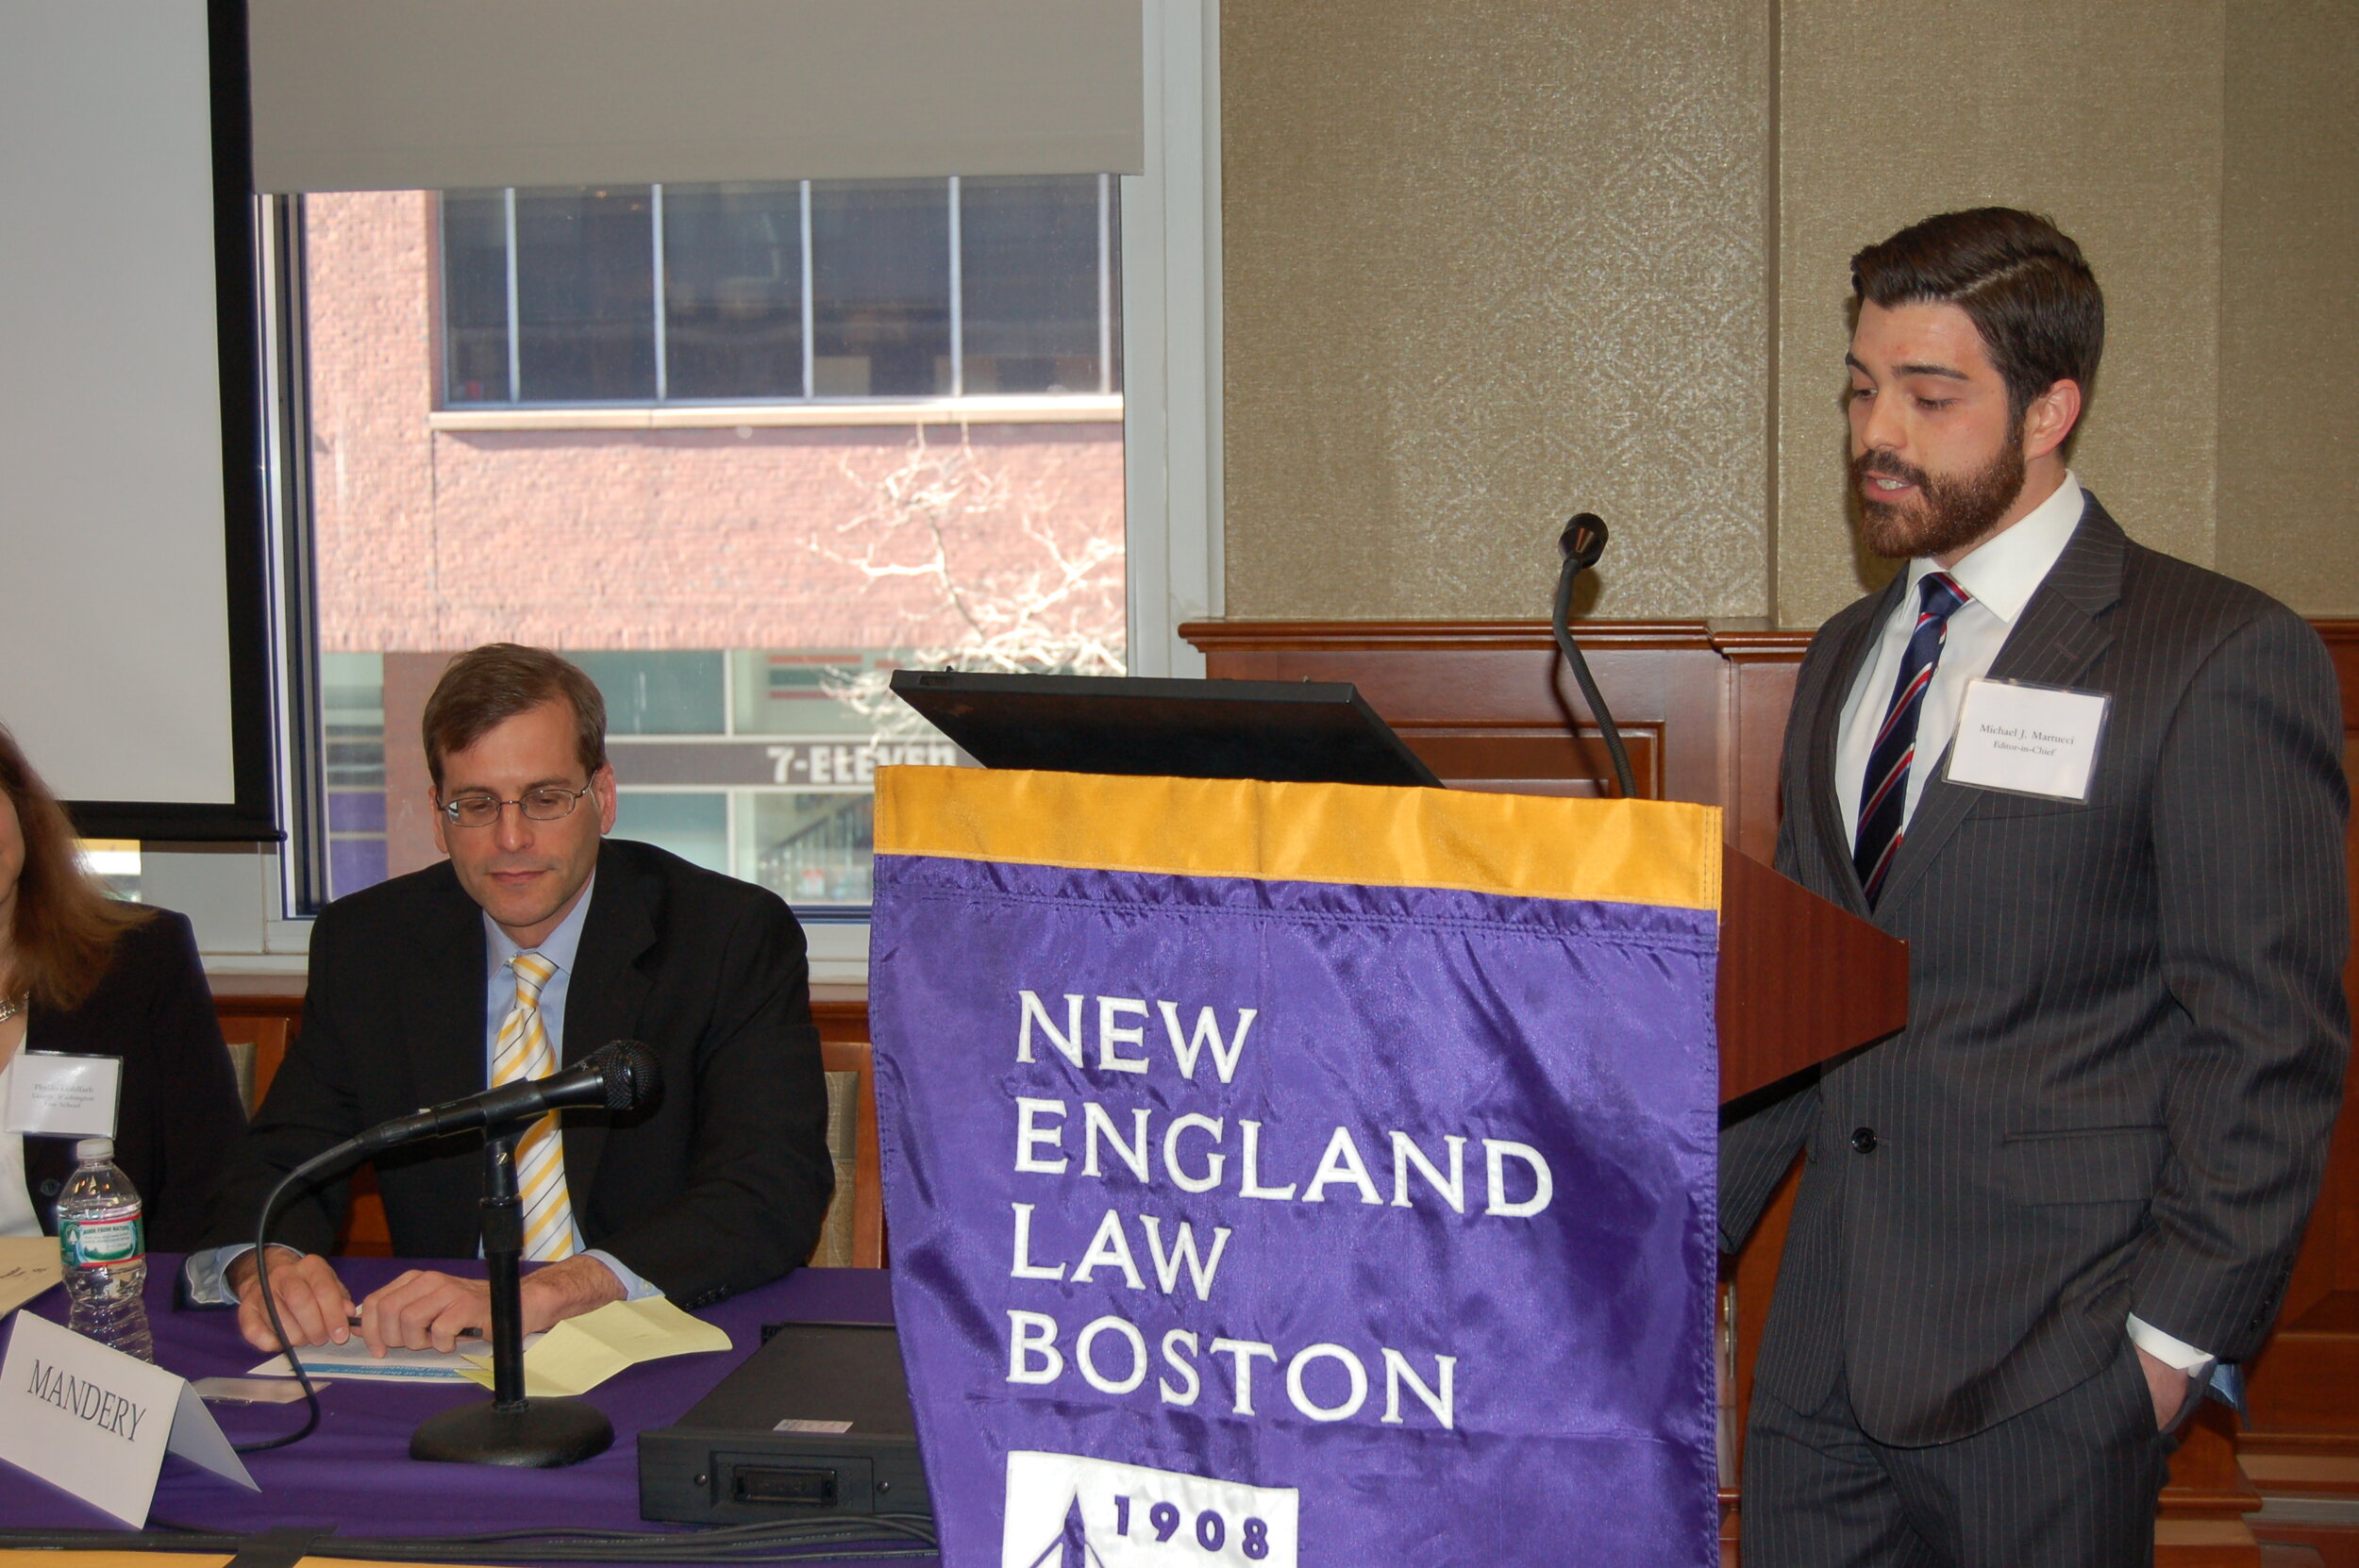  Editor-in-Chief Michael Martucci introduces Professor Evan J. Mandery, who looks on. 